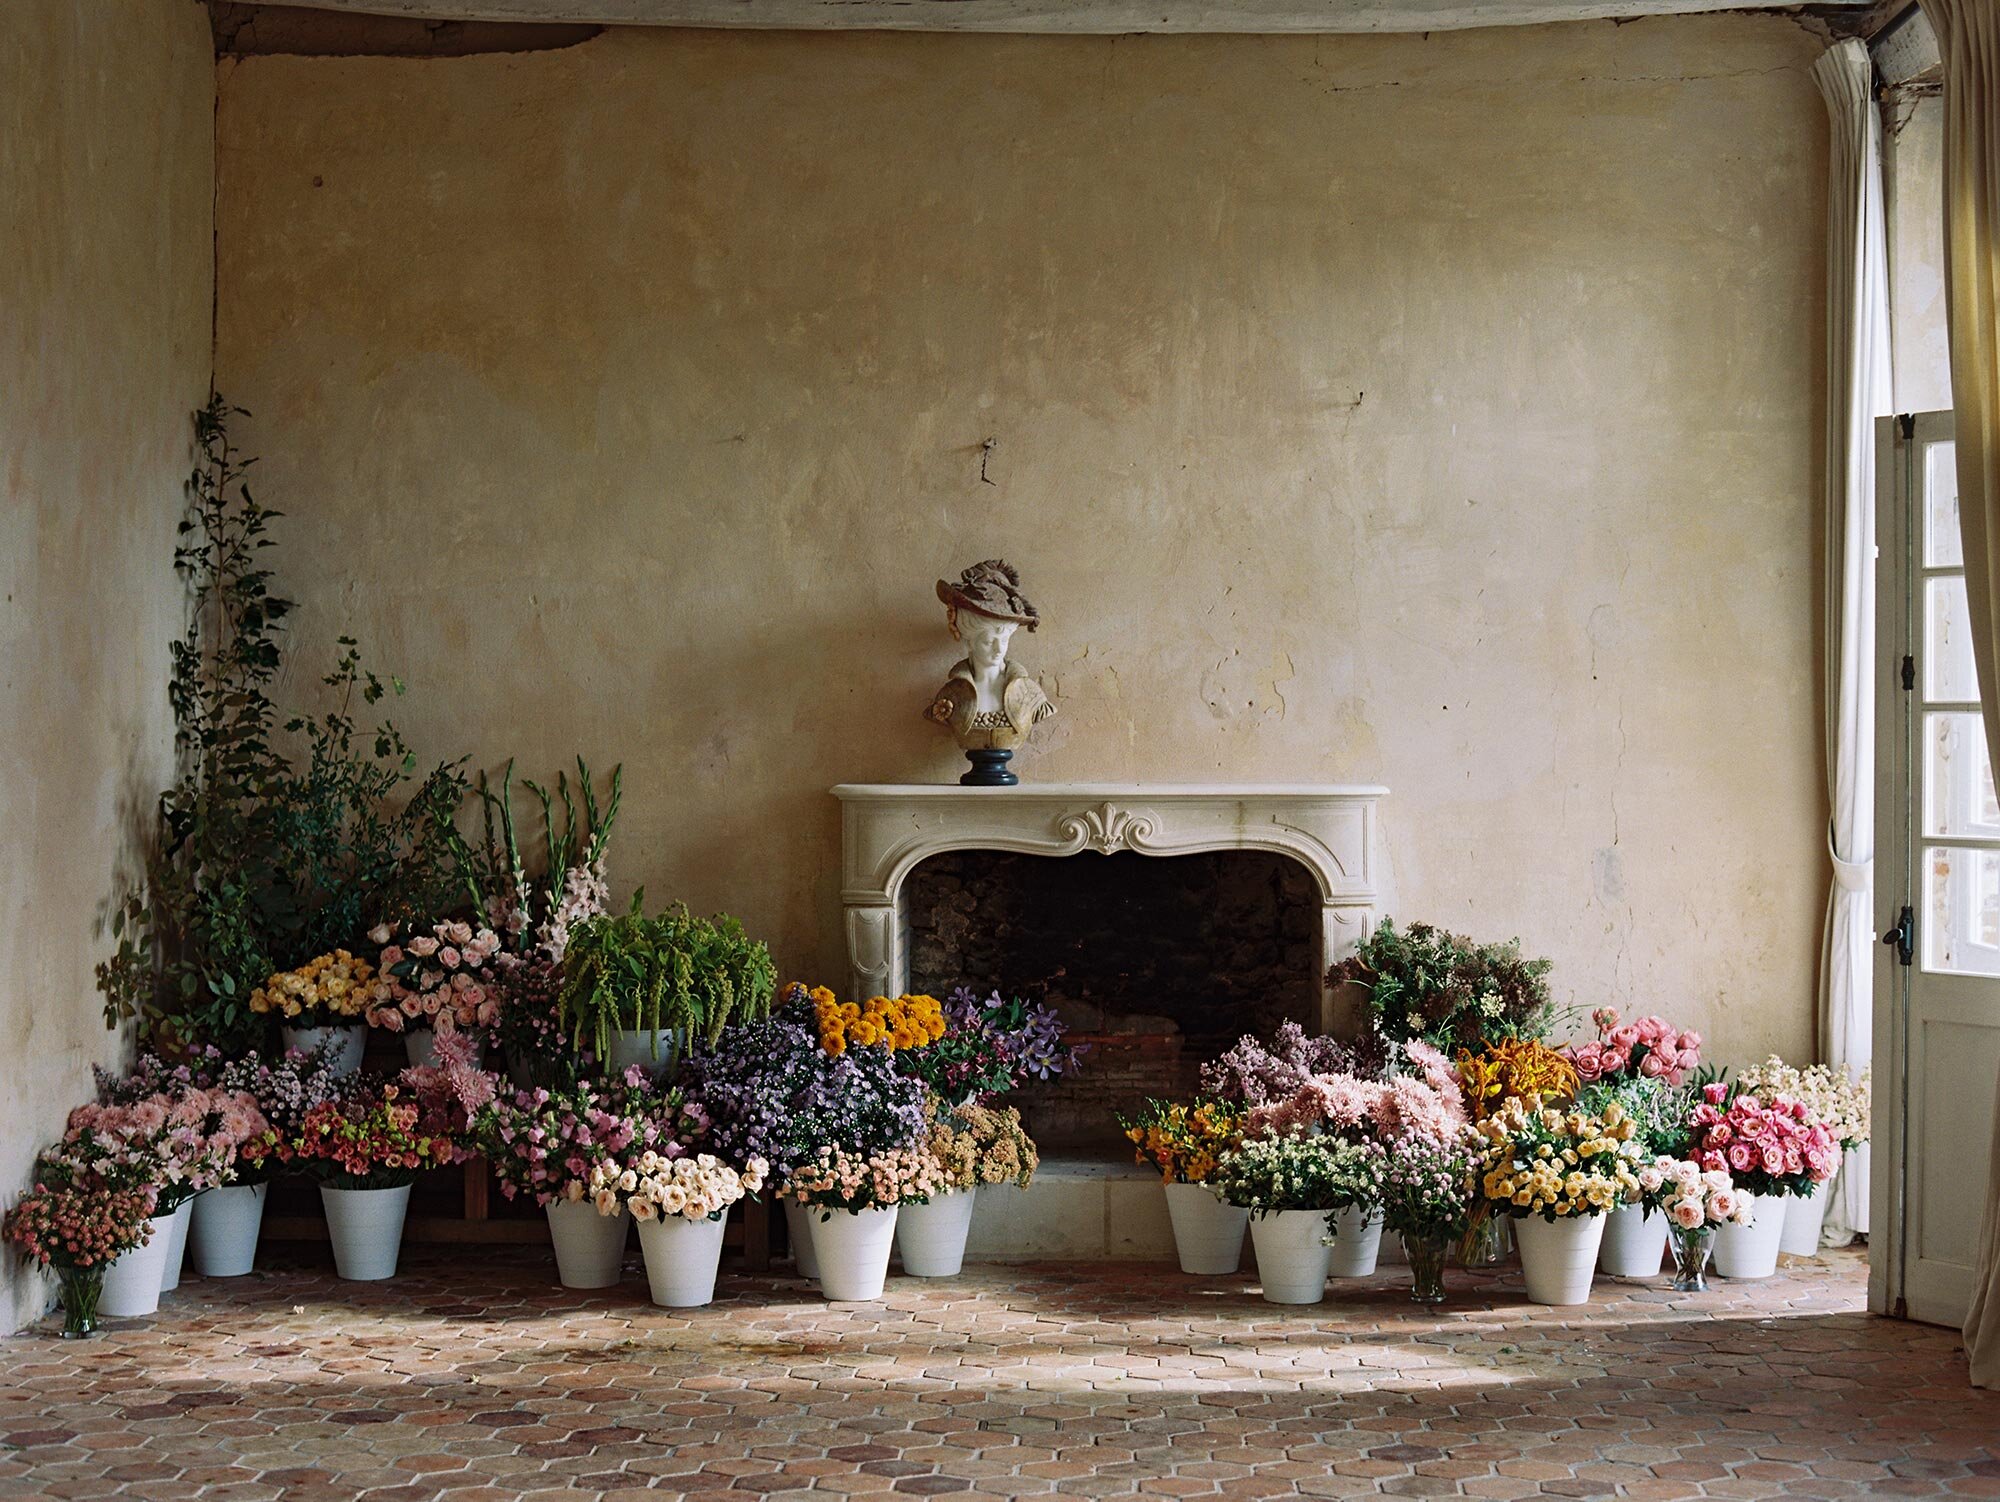 A room filled with pots of flowers and a fireplace created during the Ponderosa and Thyme workshop, a workshop at a French chateau.